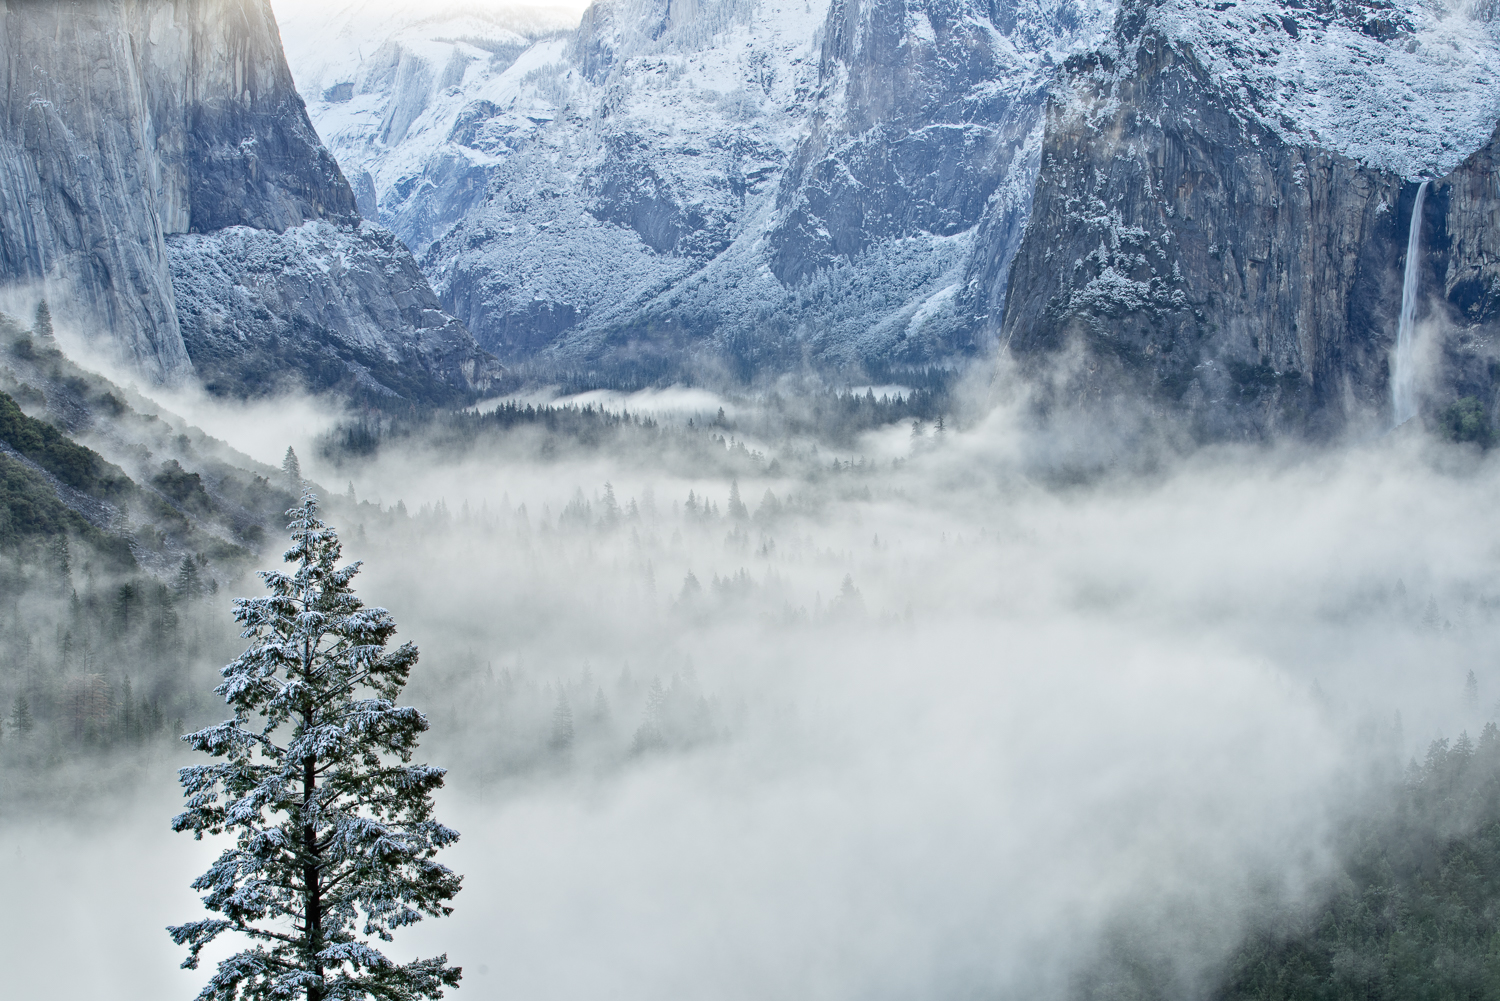 A layer of fog fills Yosemite Valley after a recent snow storm